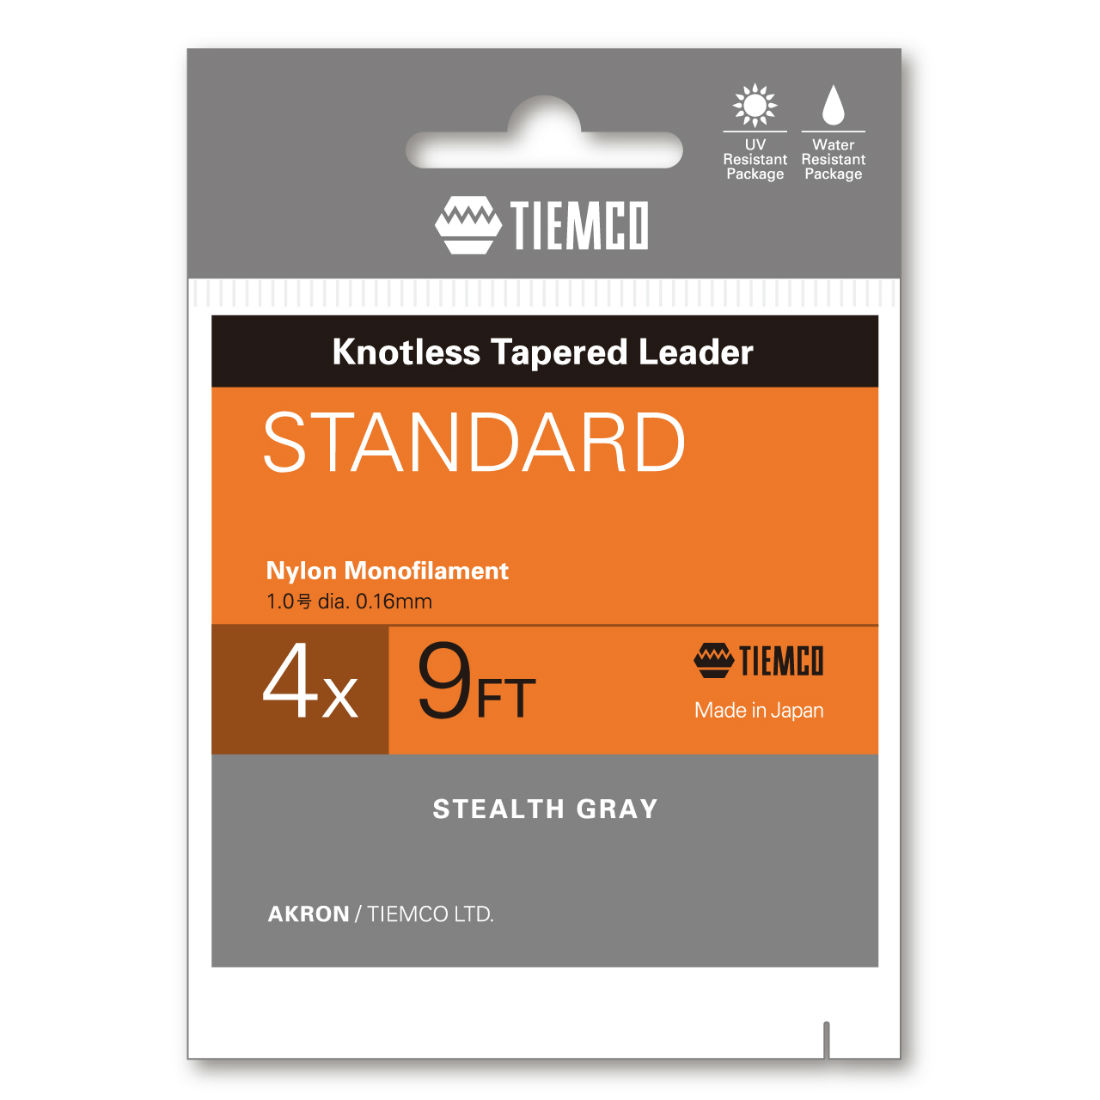 INAINTAS FLY TIEMCO STANDARD TAPERED LEADER 7.5ft 4X